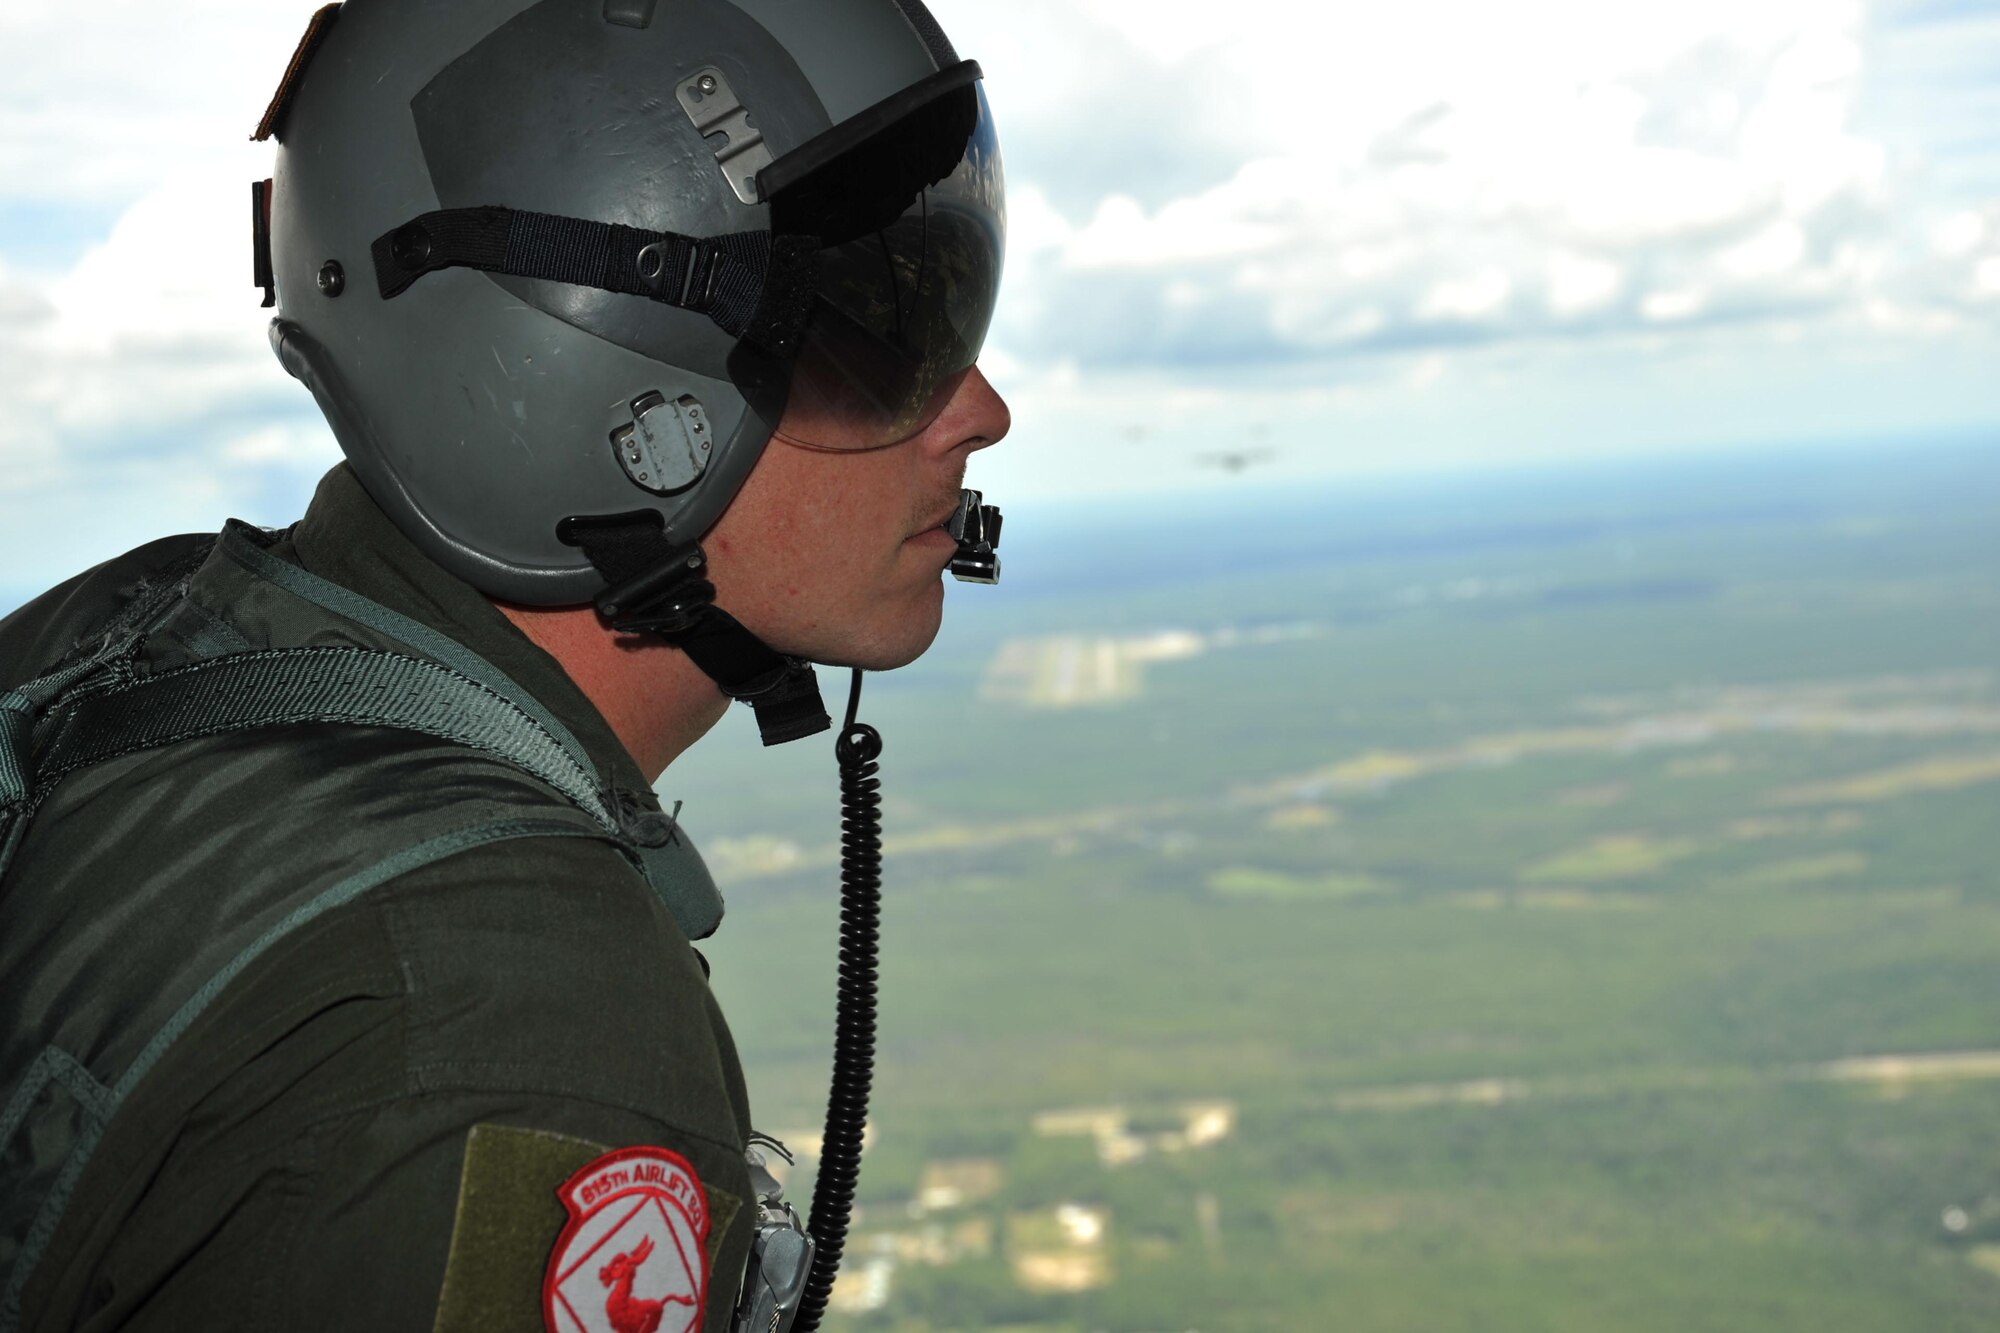 Master Sgt. Chris Sentilles, 815th Airlift Squadron loadmaster, looks out the back of one of the squadrons C-130J cargo aircraft during a four-aircraft training mission Sept. 11, 2016, over the Mississippi Gulfcoast. The aircraft took off from Keesler Air Force Base, Mississippi, and airdropped simulated cargo and heavy equipment over Stennis International Airport, Mississippi. (U.S. Air Force photo/Tech. Sgt. Ryan Labadens)